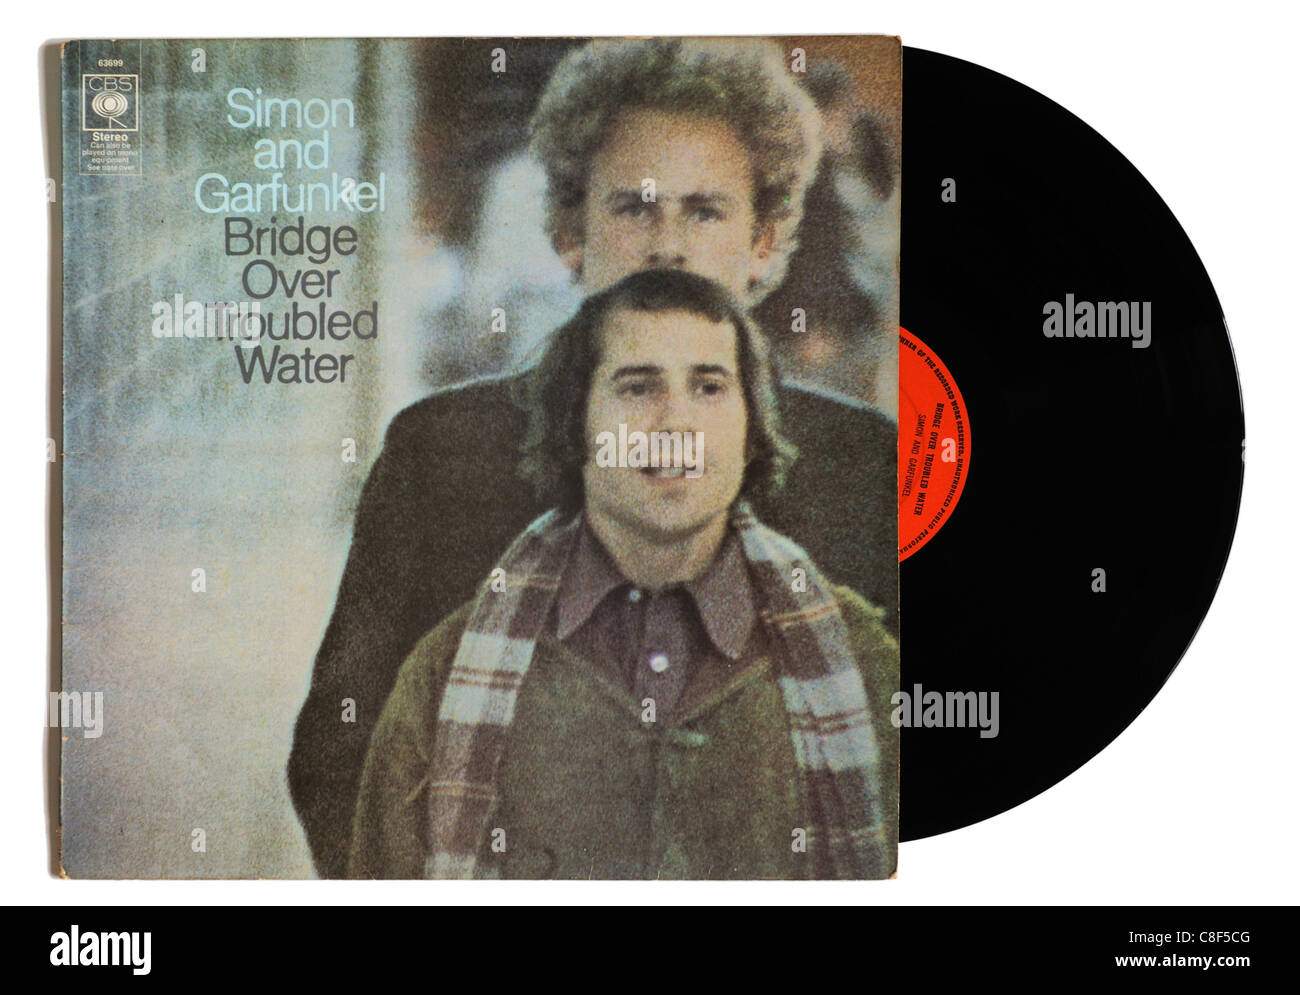 Simon And Garfunkel High Resolution Stock Photography and Images - Alamy